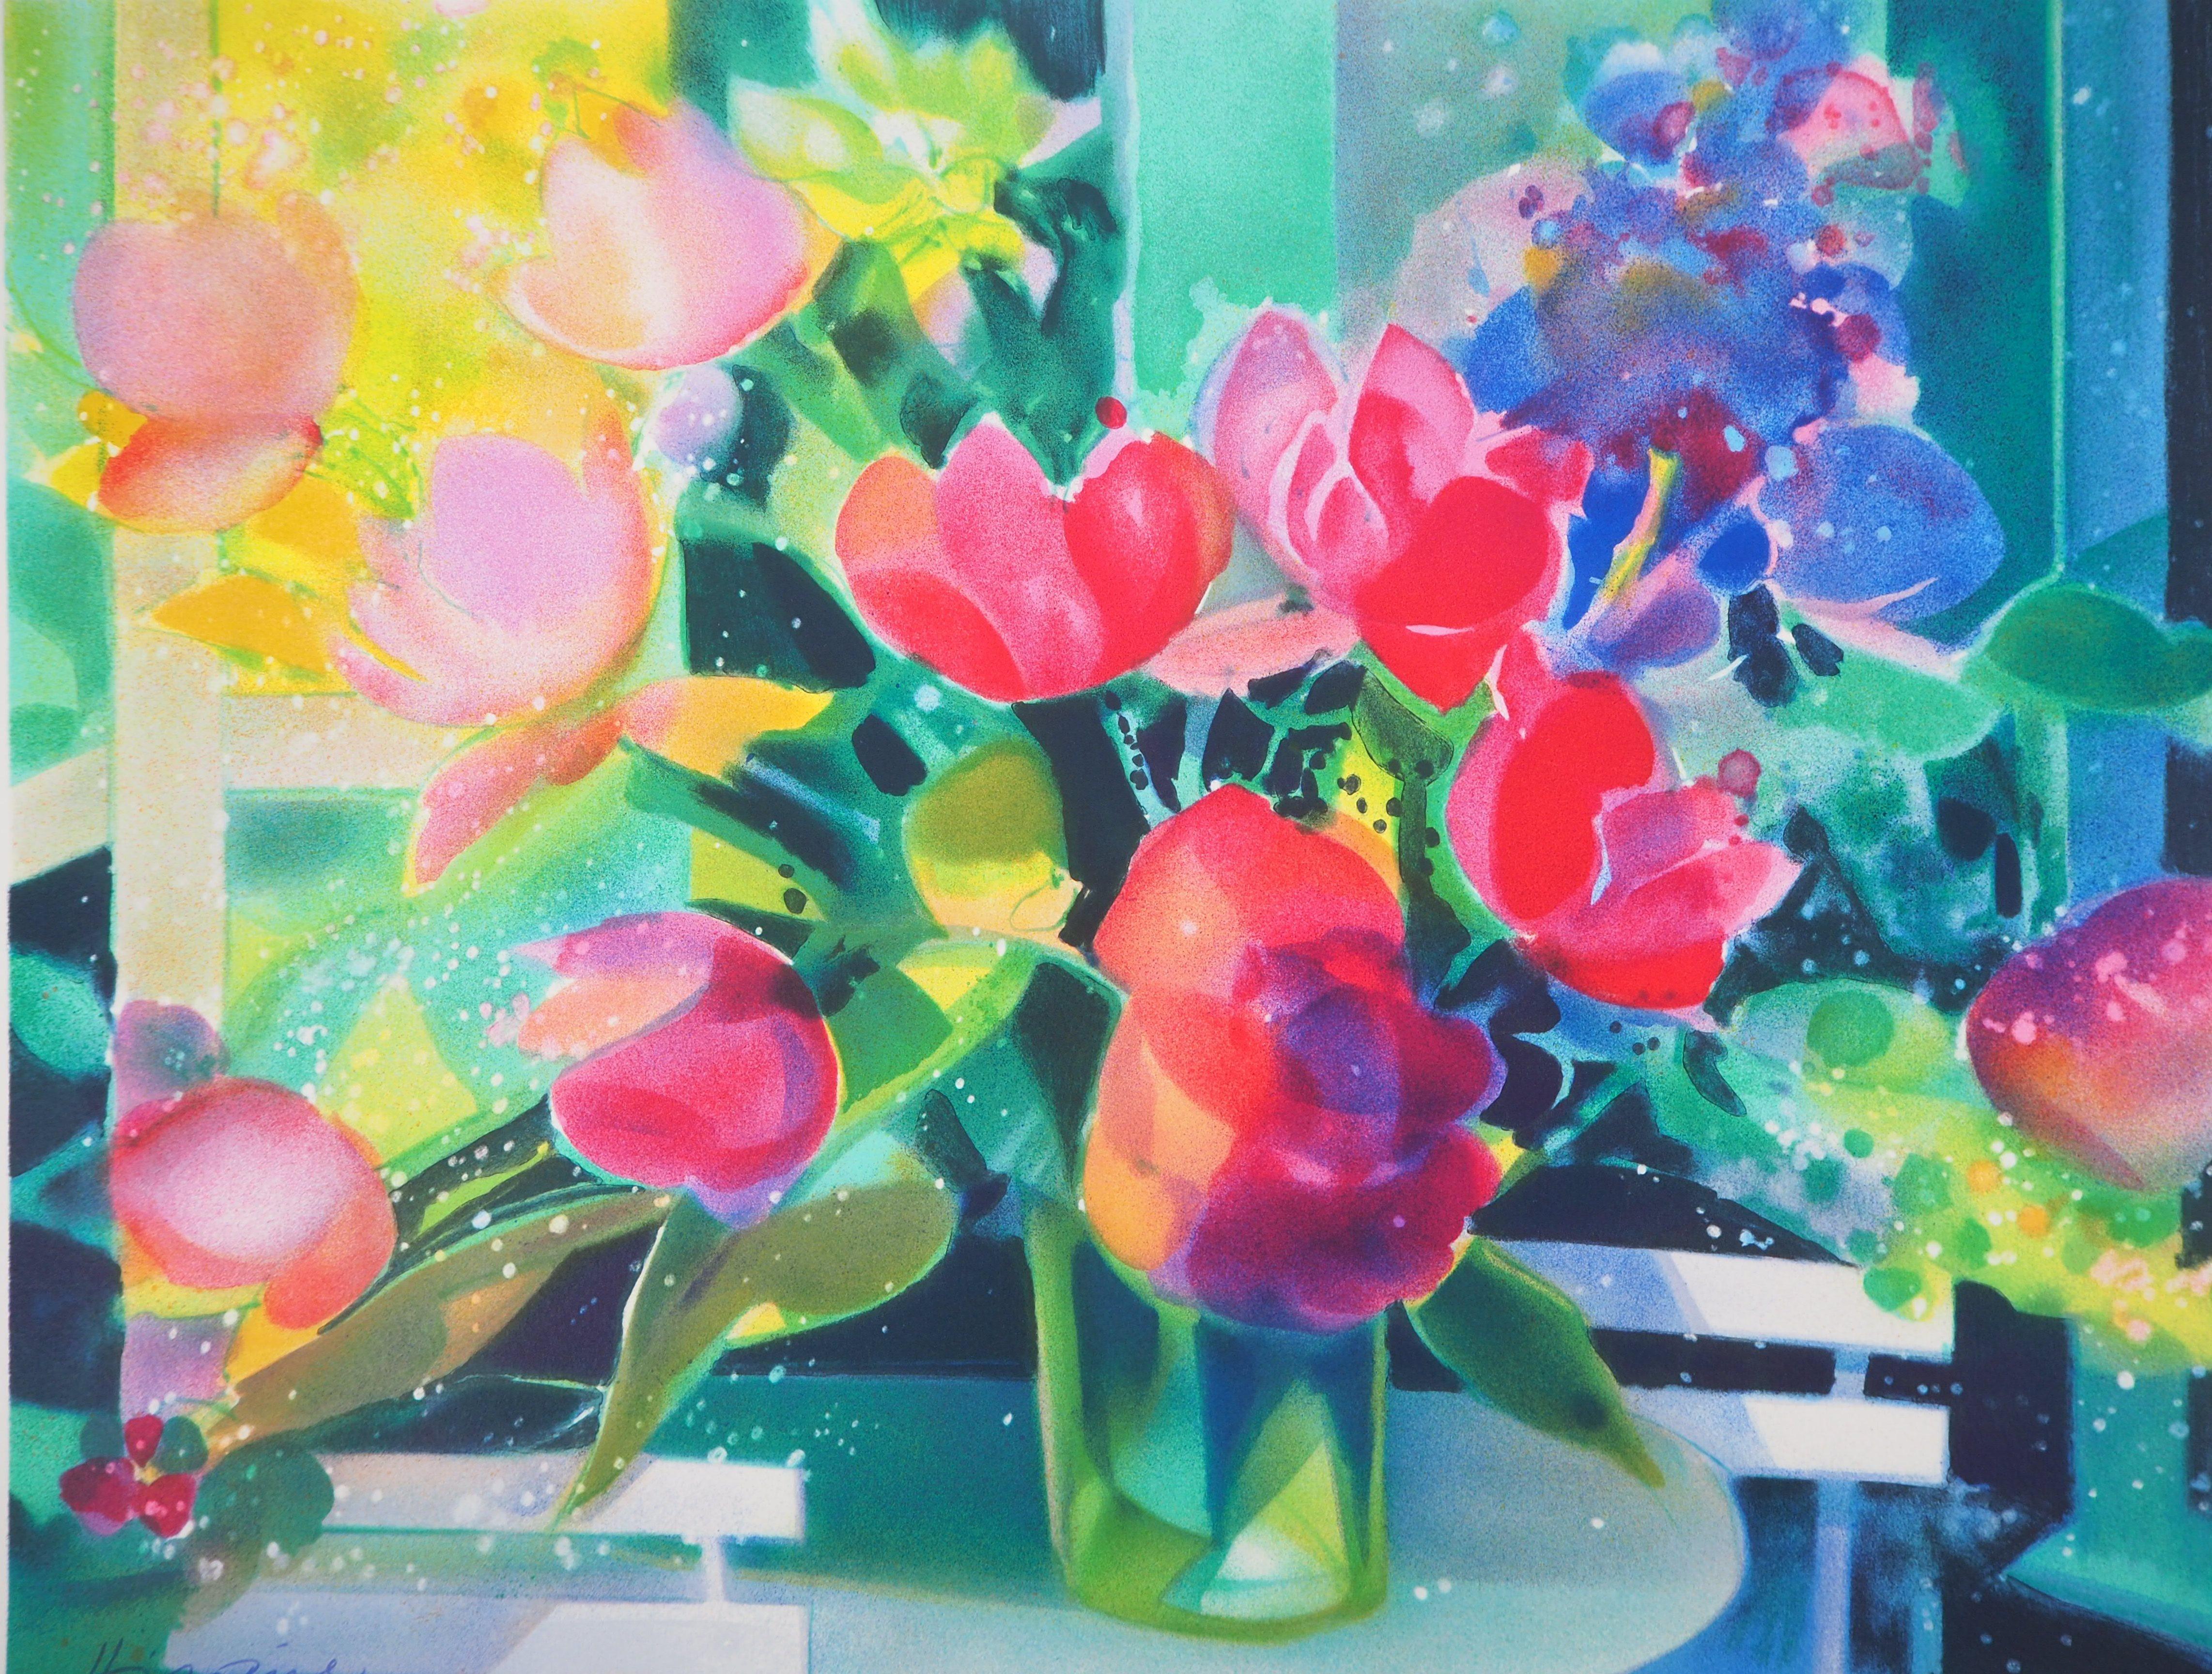 Shining Bouquet of Tulips - Original lithograph - Print by Camille Hilaire